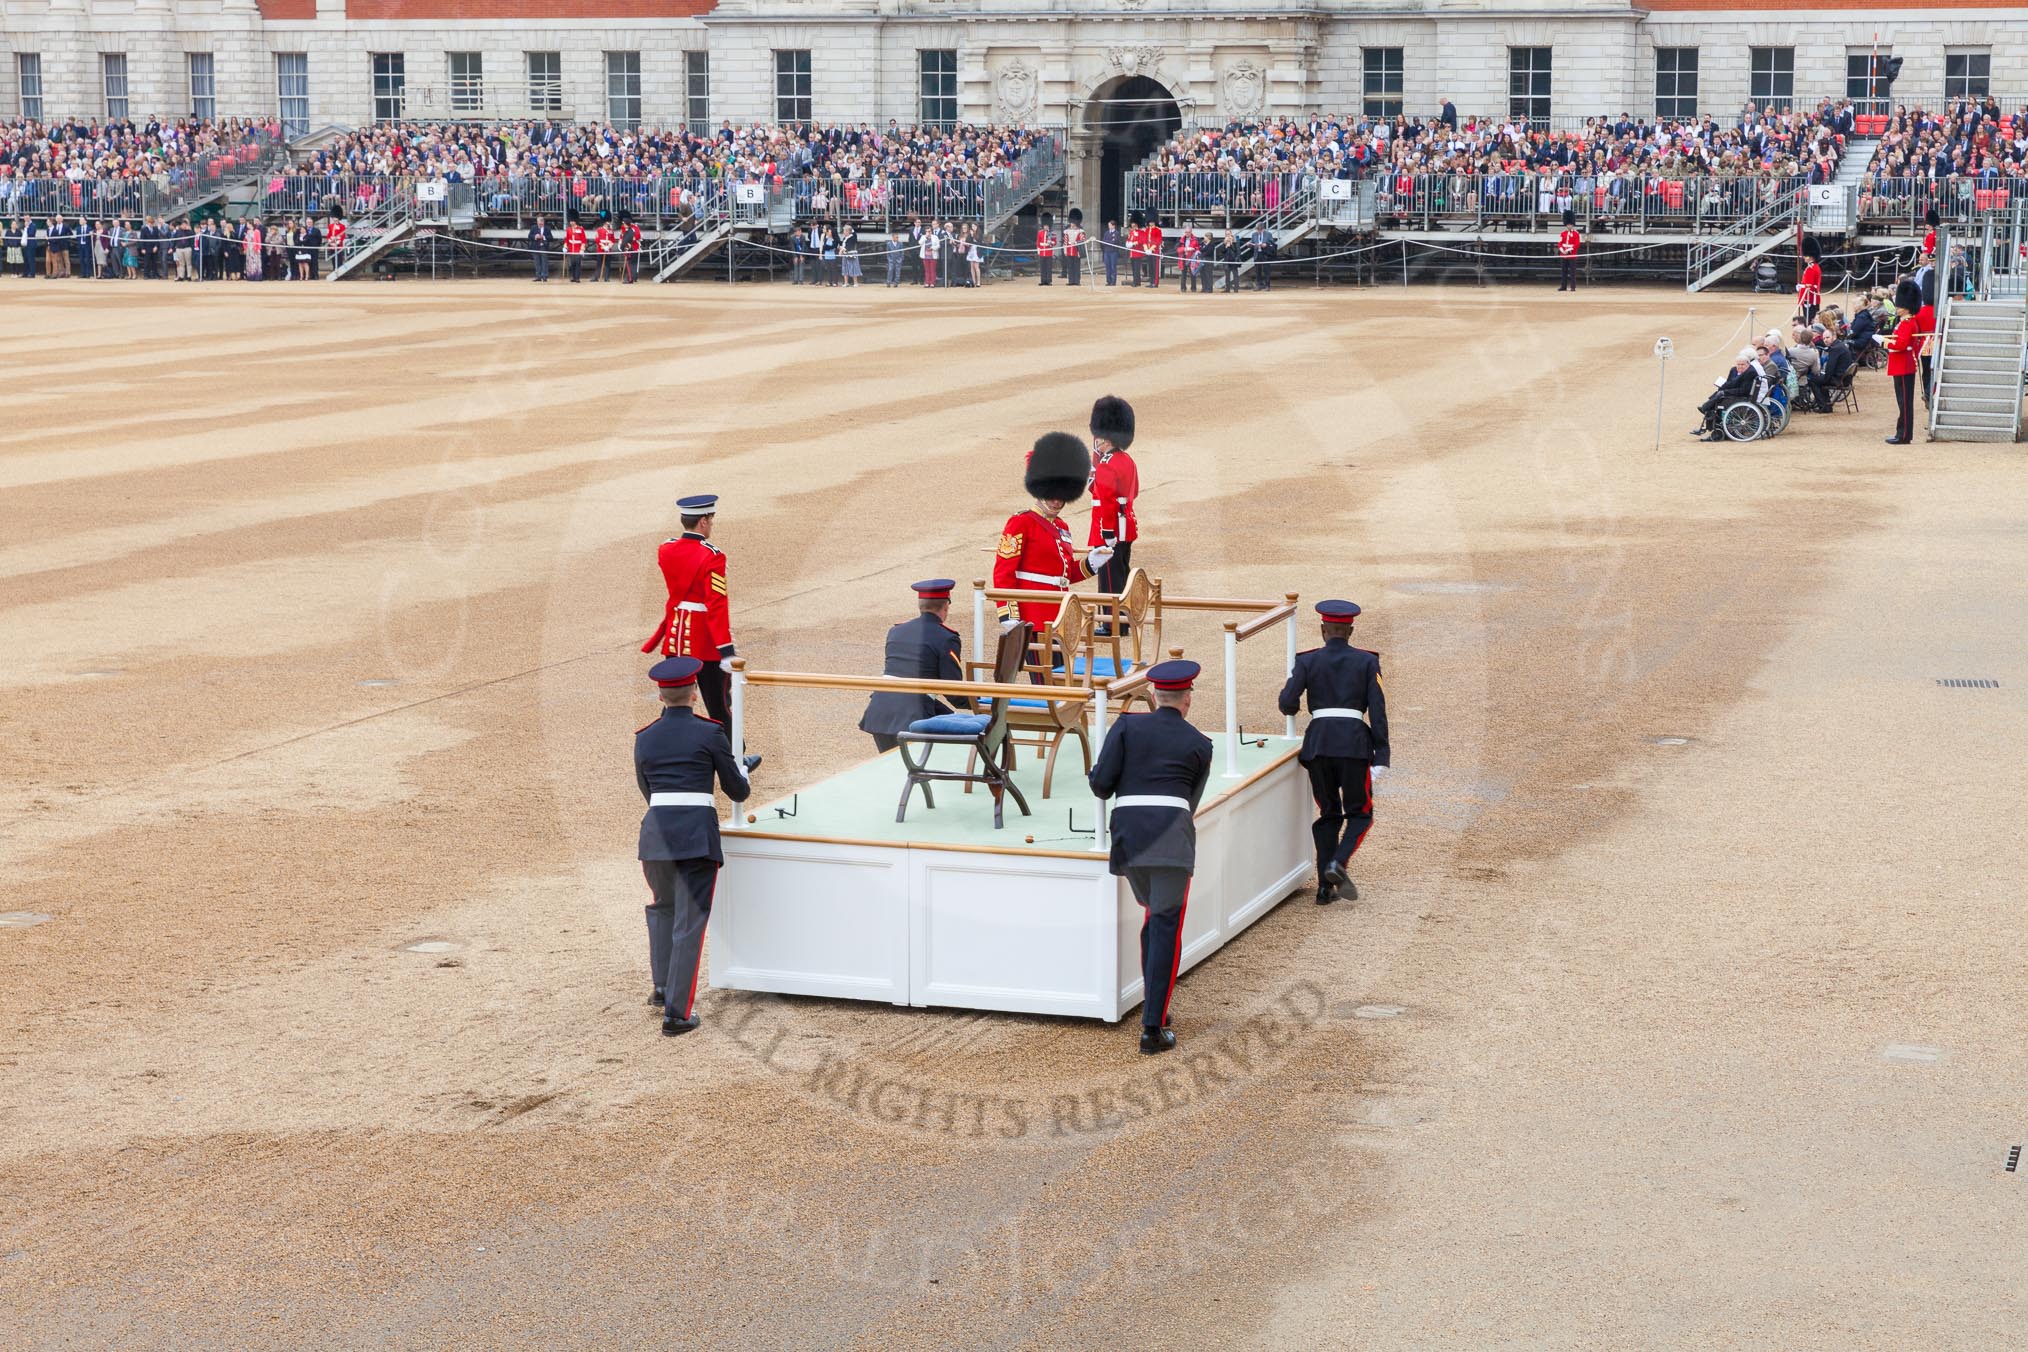 The Colonel's Review 2016.
Horse Guards Parade, Westminster,
London,

United Kingdom,
on 04 June 2016 at 10:53, image #140